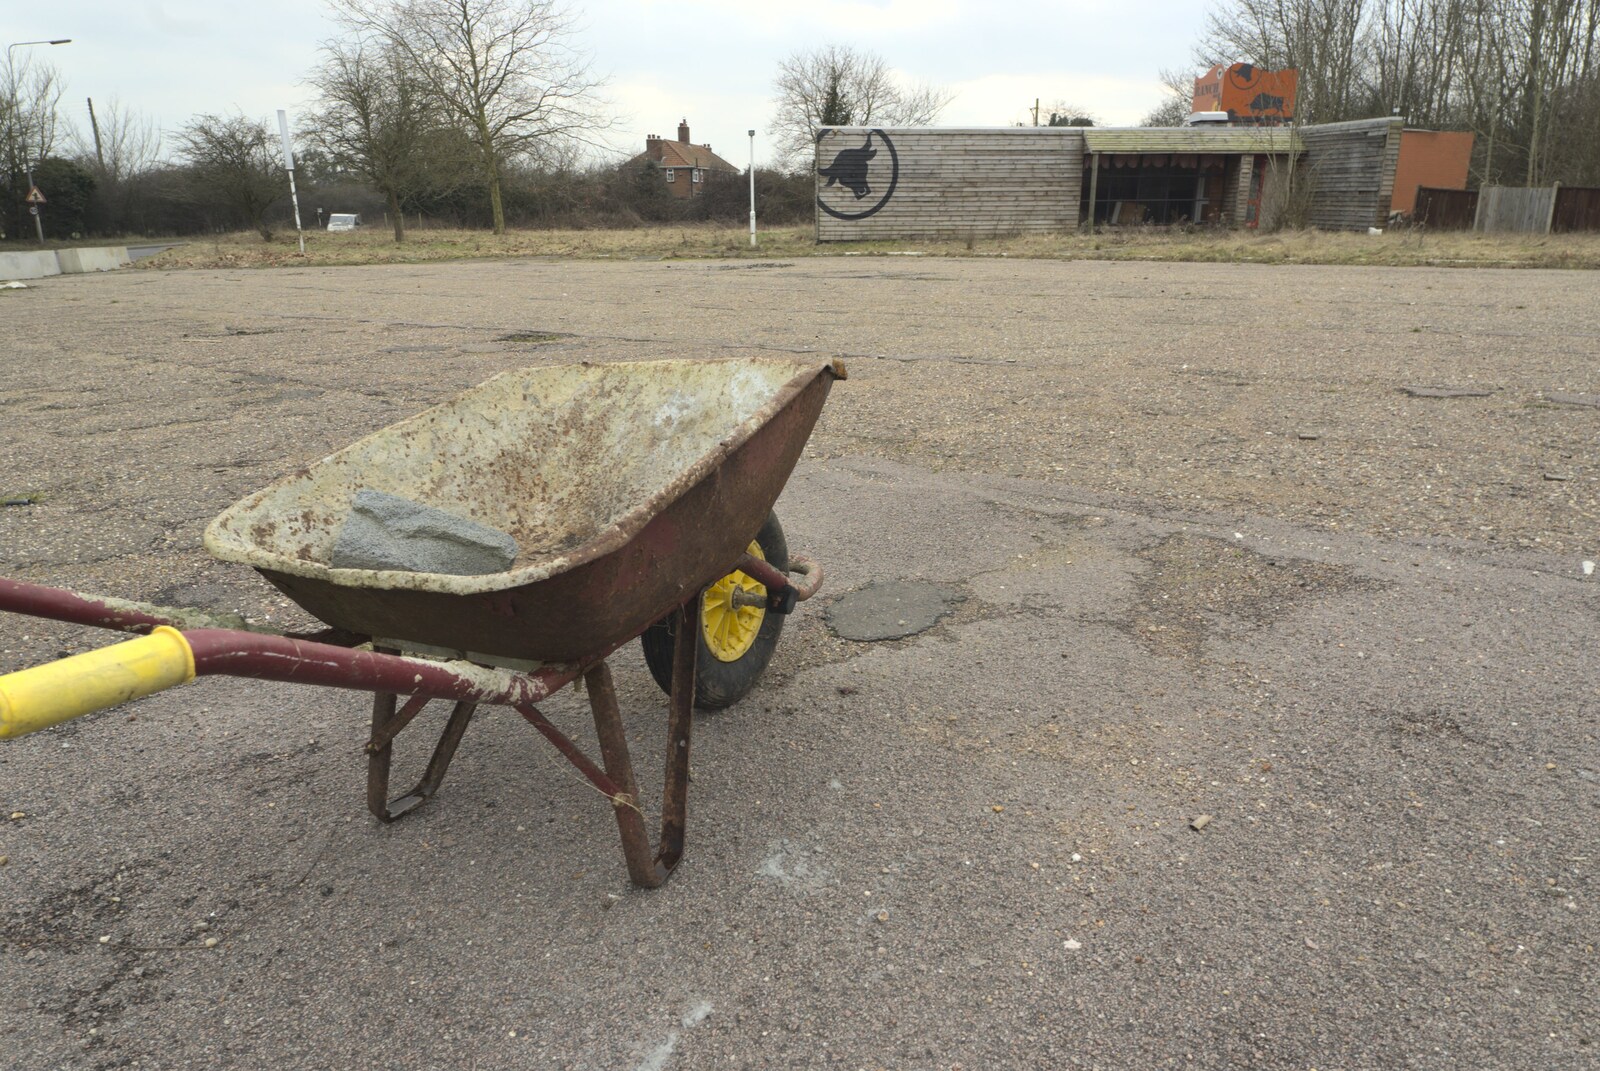 Science Park Demolition and the Derelict Ranch Diner, Cambridge and Tasburgh, Norfolk - 17th March 2010: An abandoned wheelbarrow